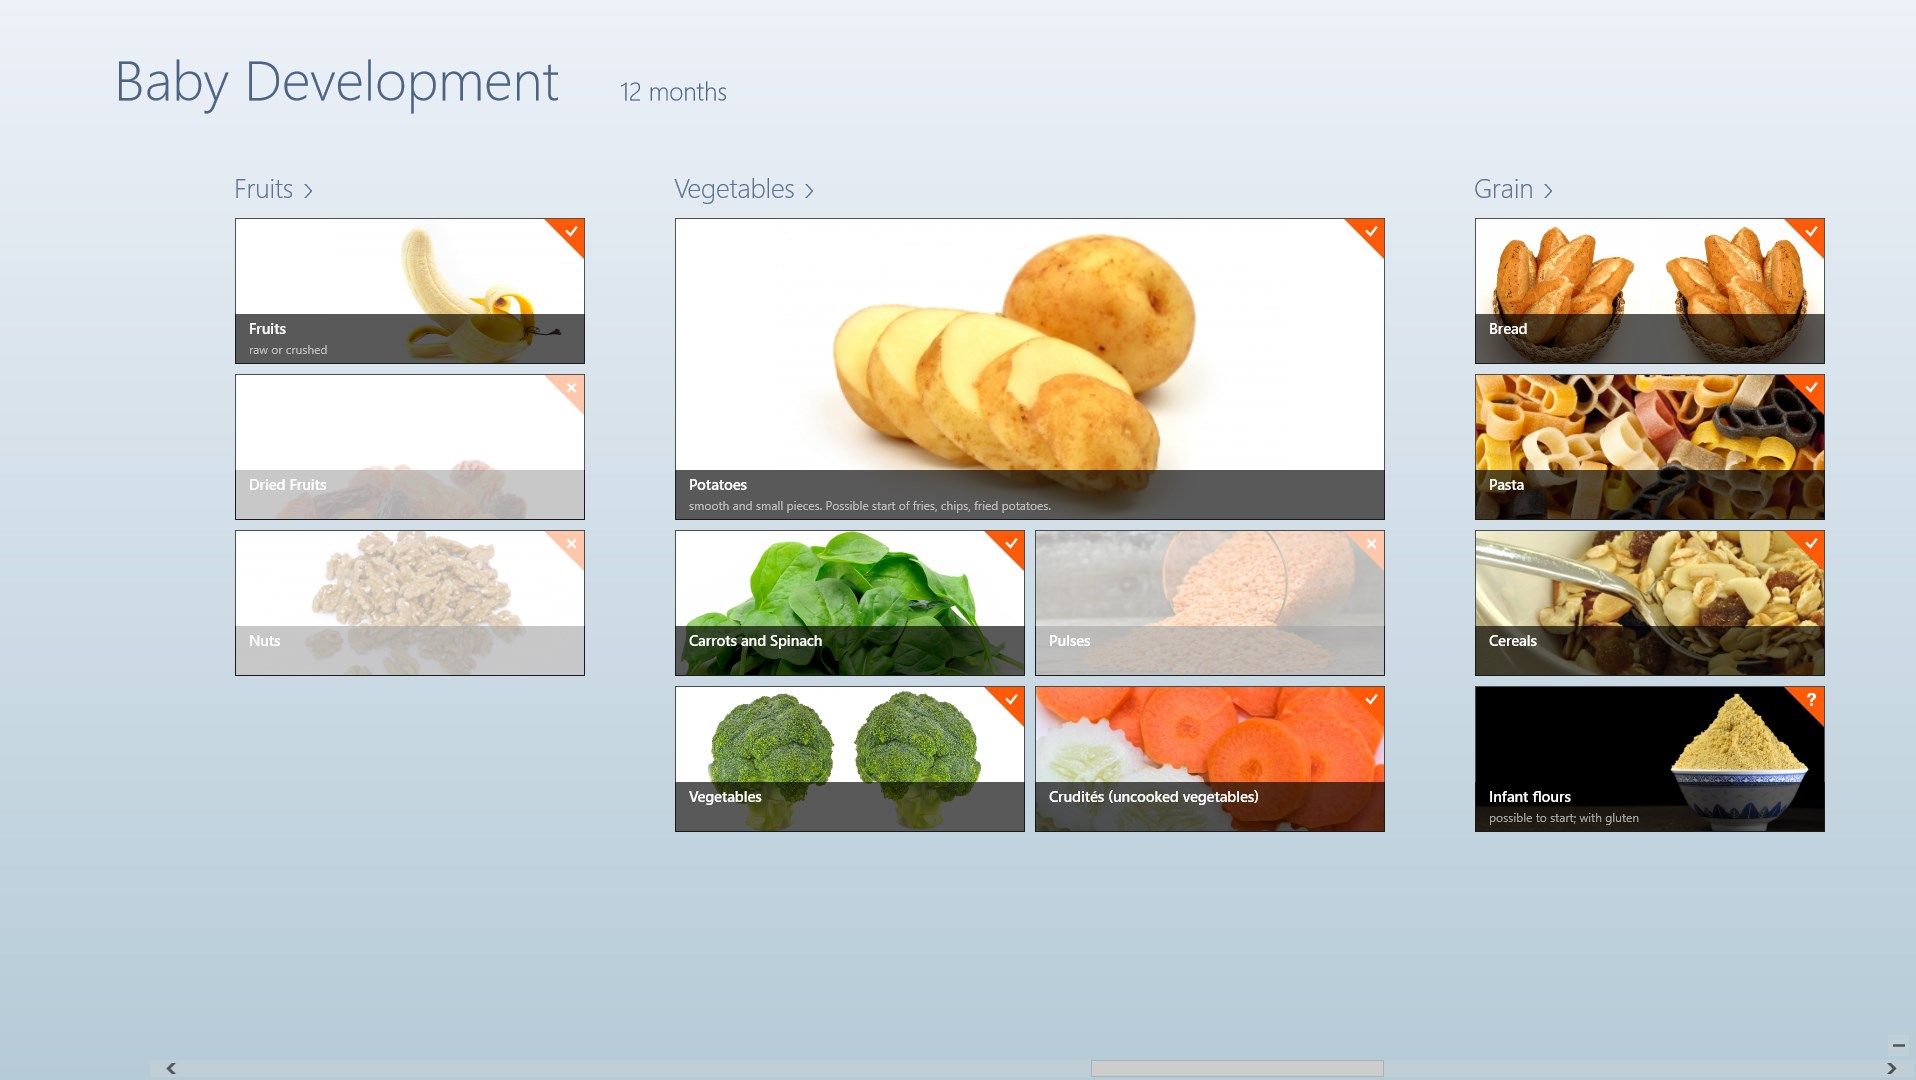 Application's main page showing some food types categories.